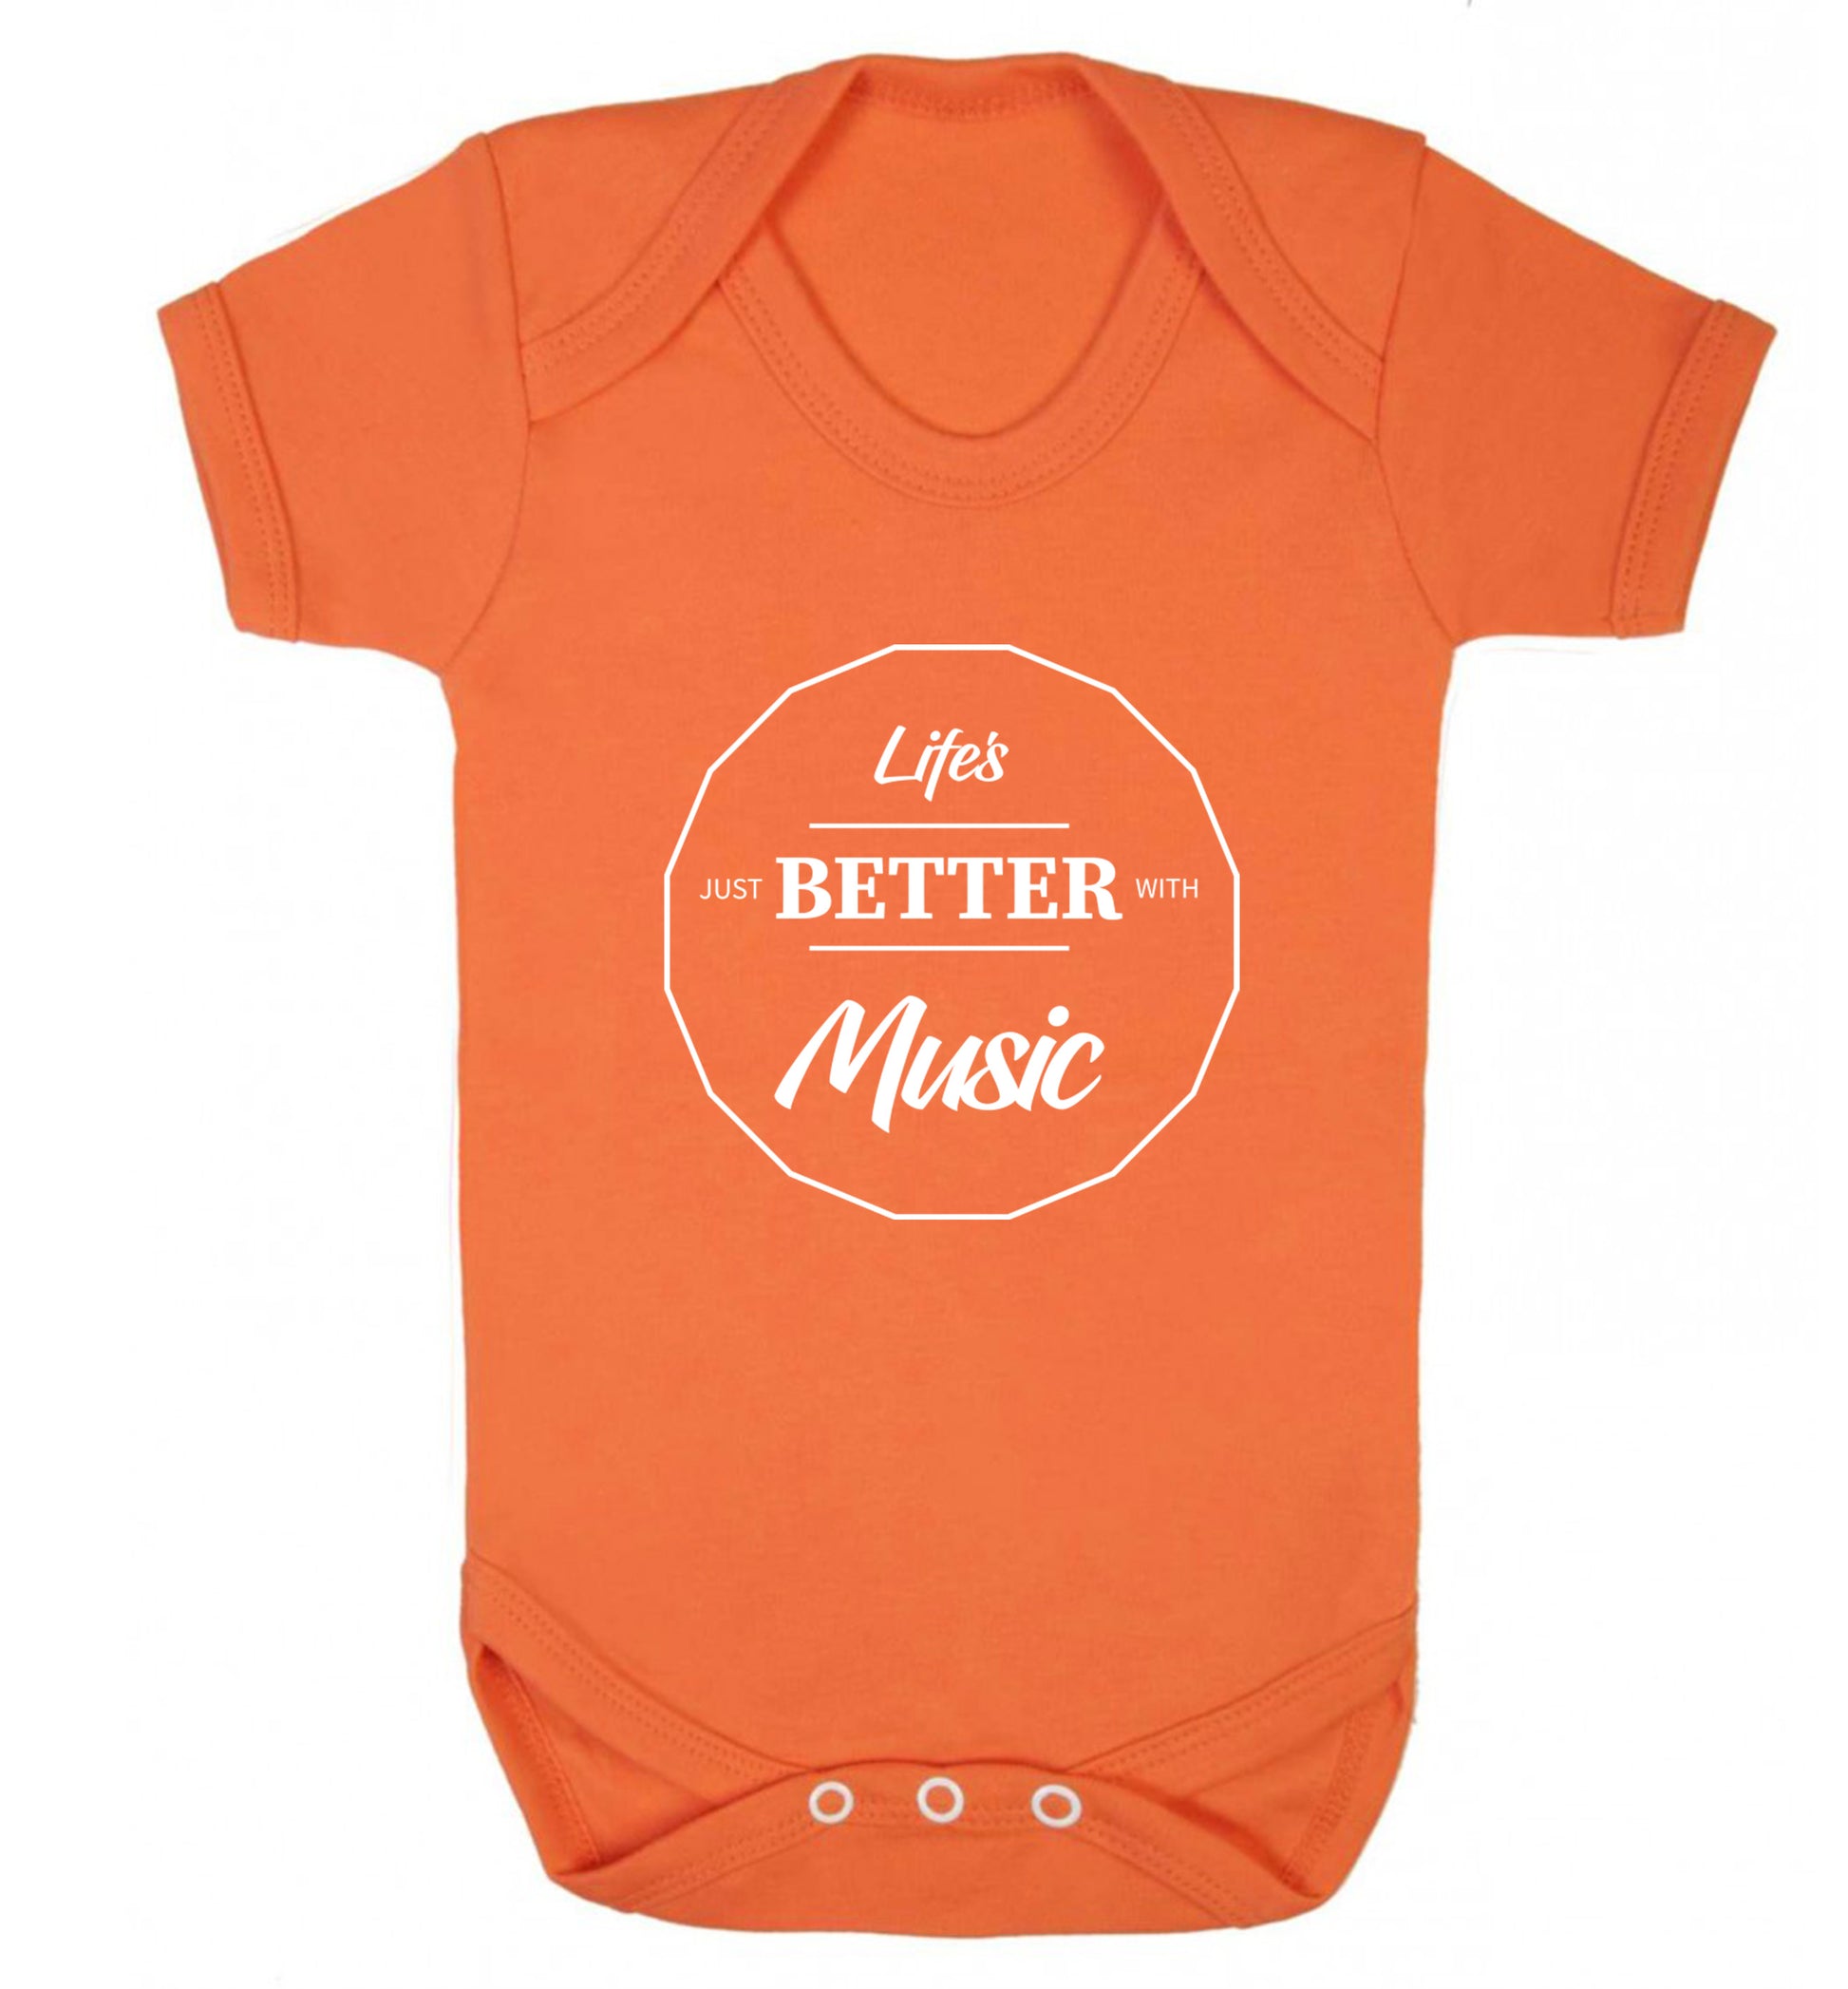 Life is Better With Music Baby Vest orange 18-24 months